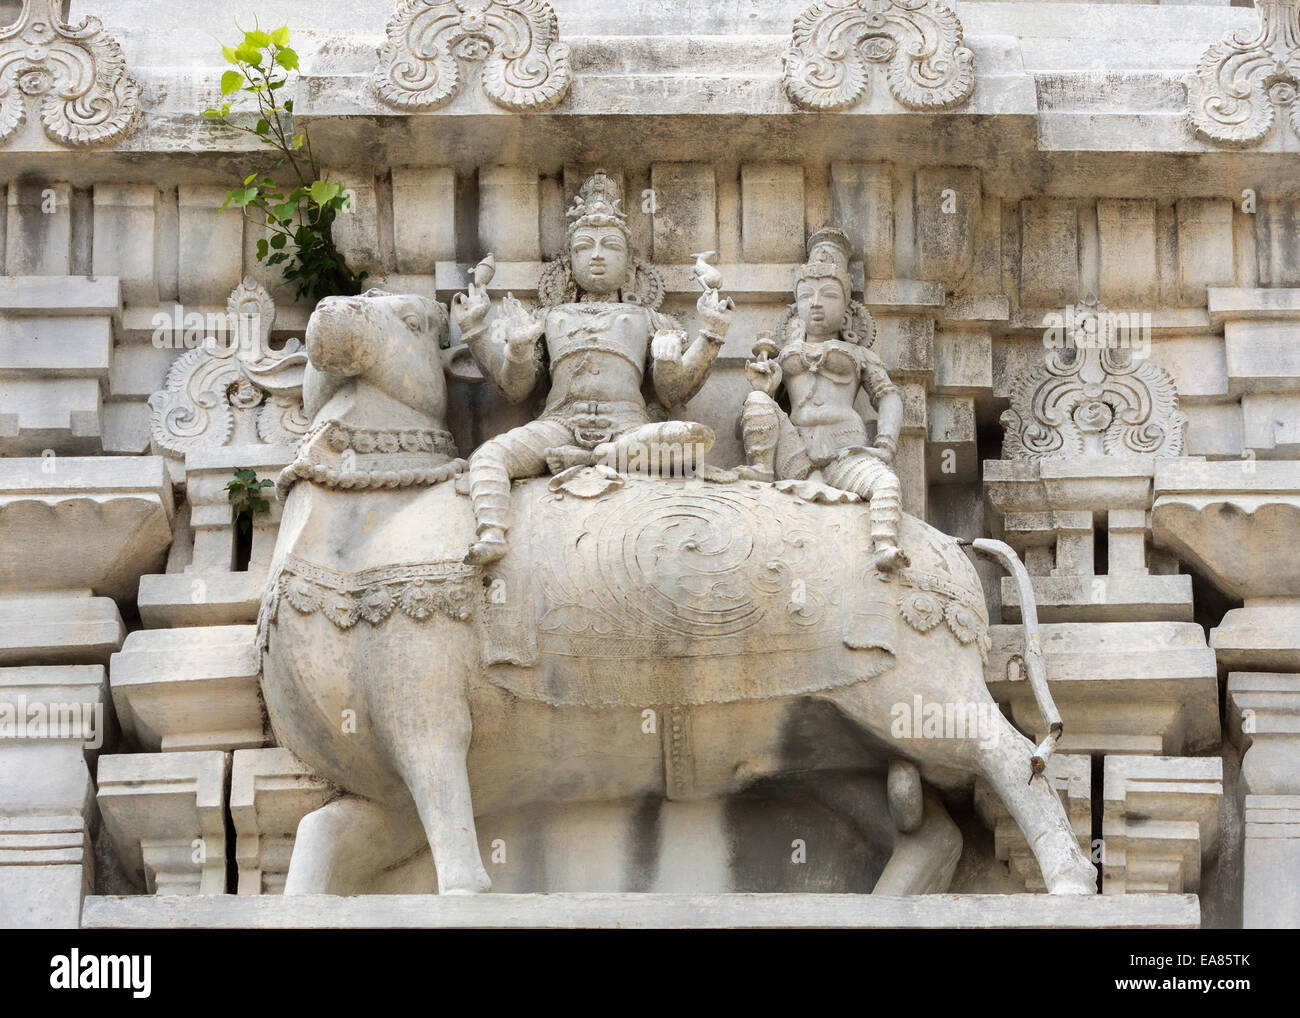 Lord Shiva and his wife Parvati sit on Nandi the bull. Stock Photo